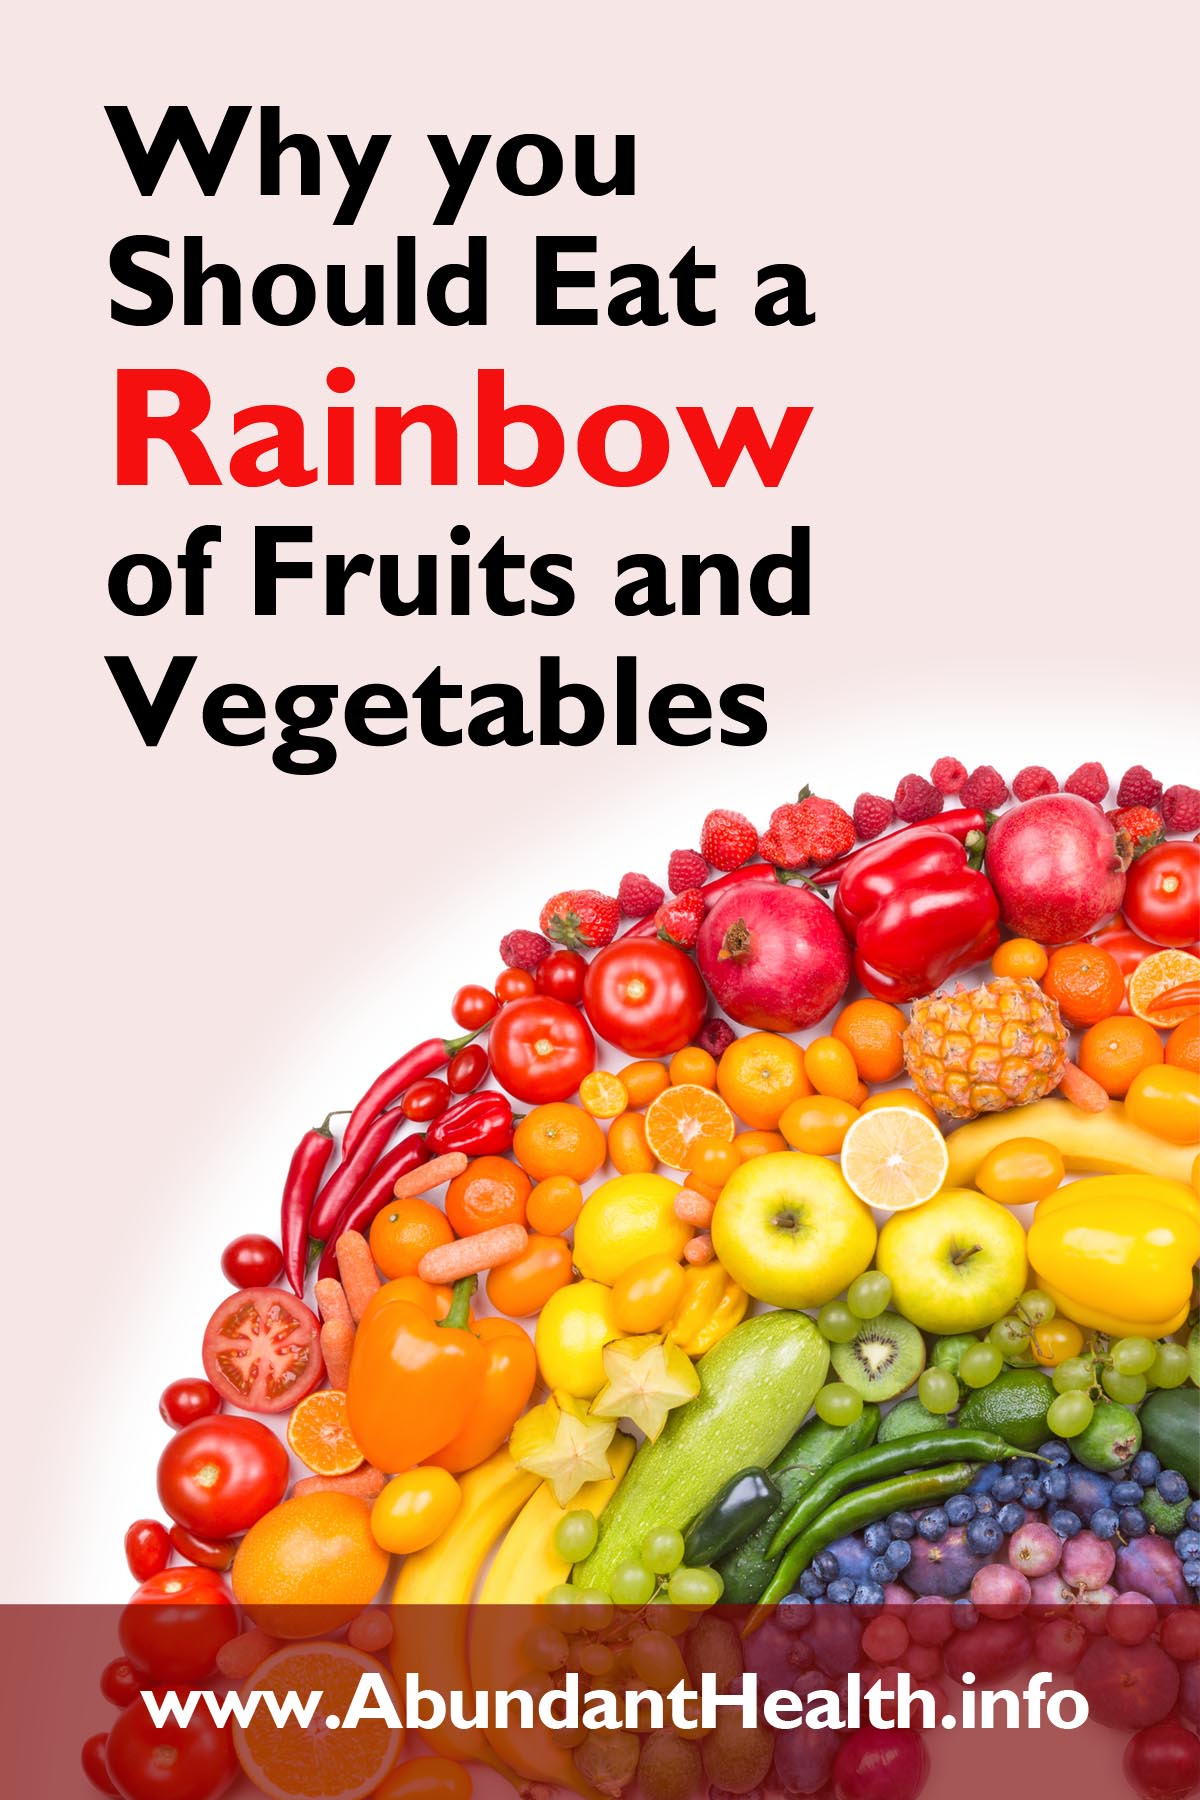 Why you Should Eat a Rainbow of Fruits and Vegetables